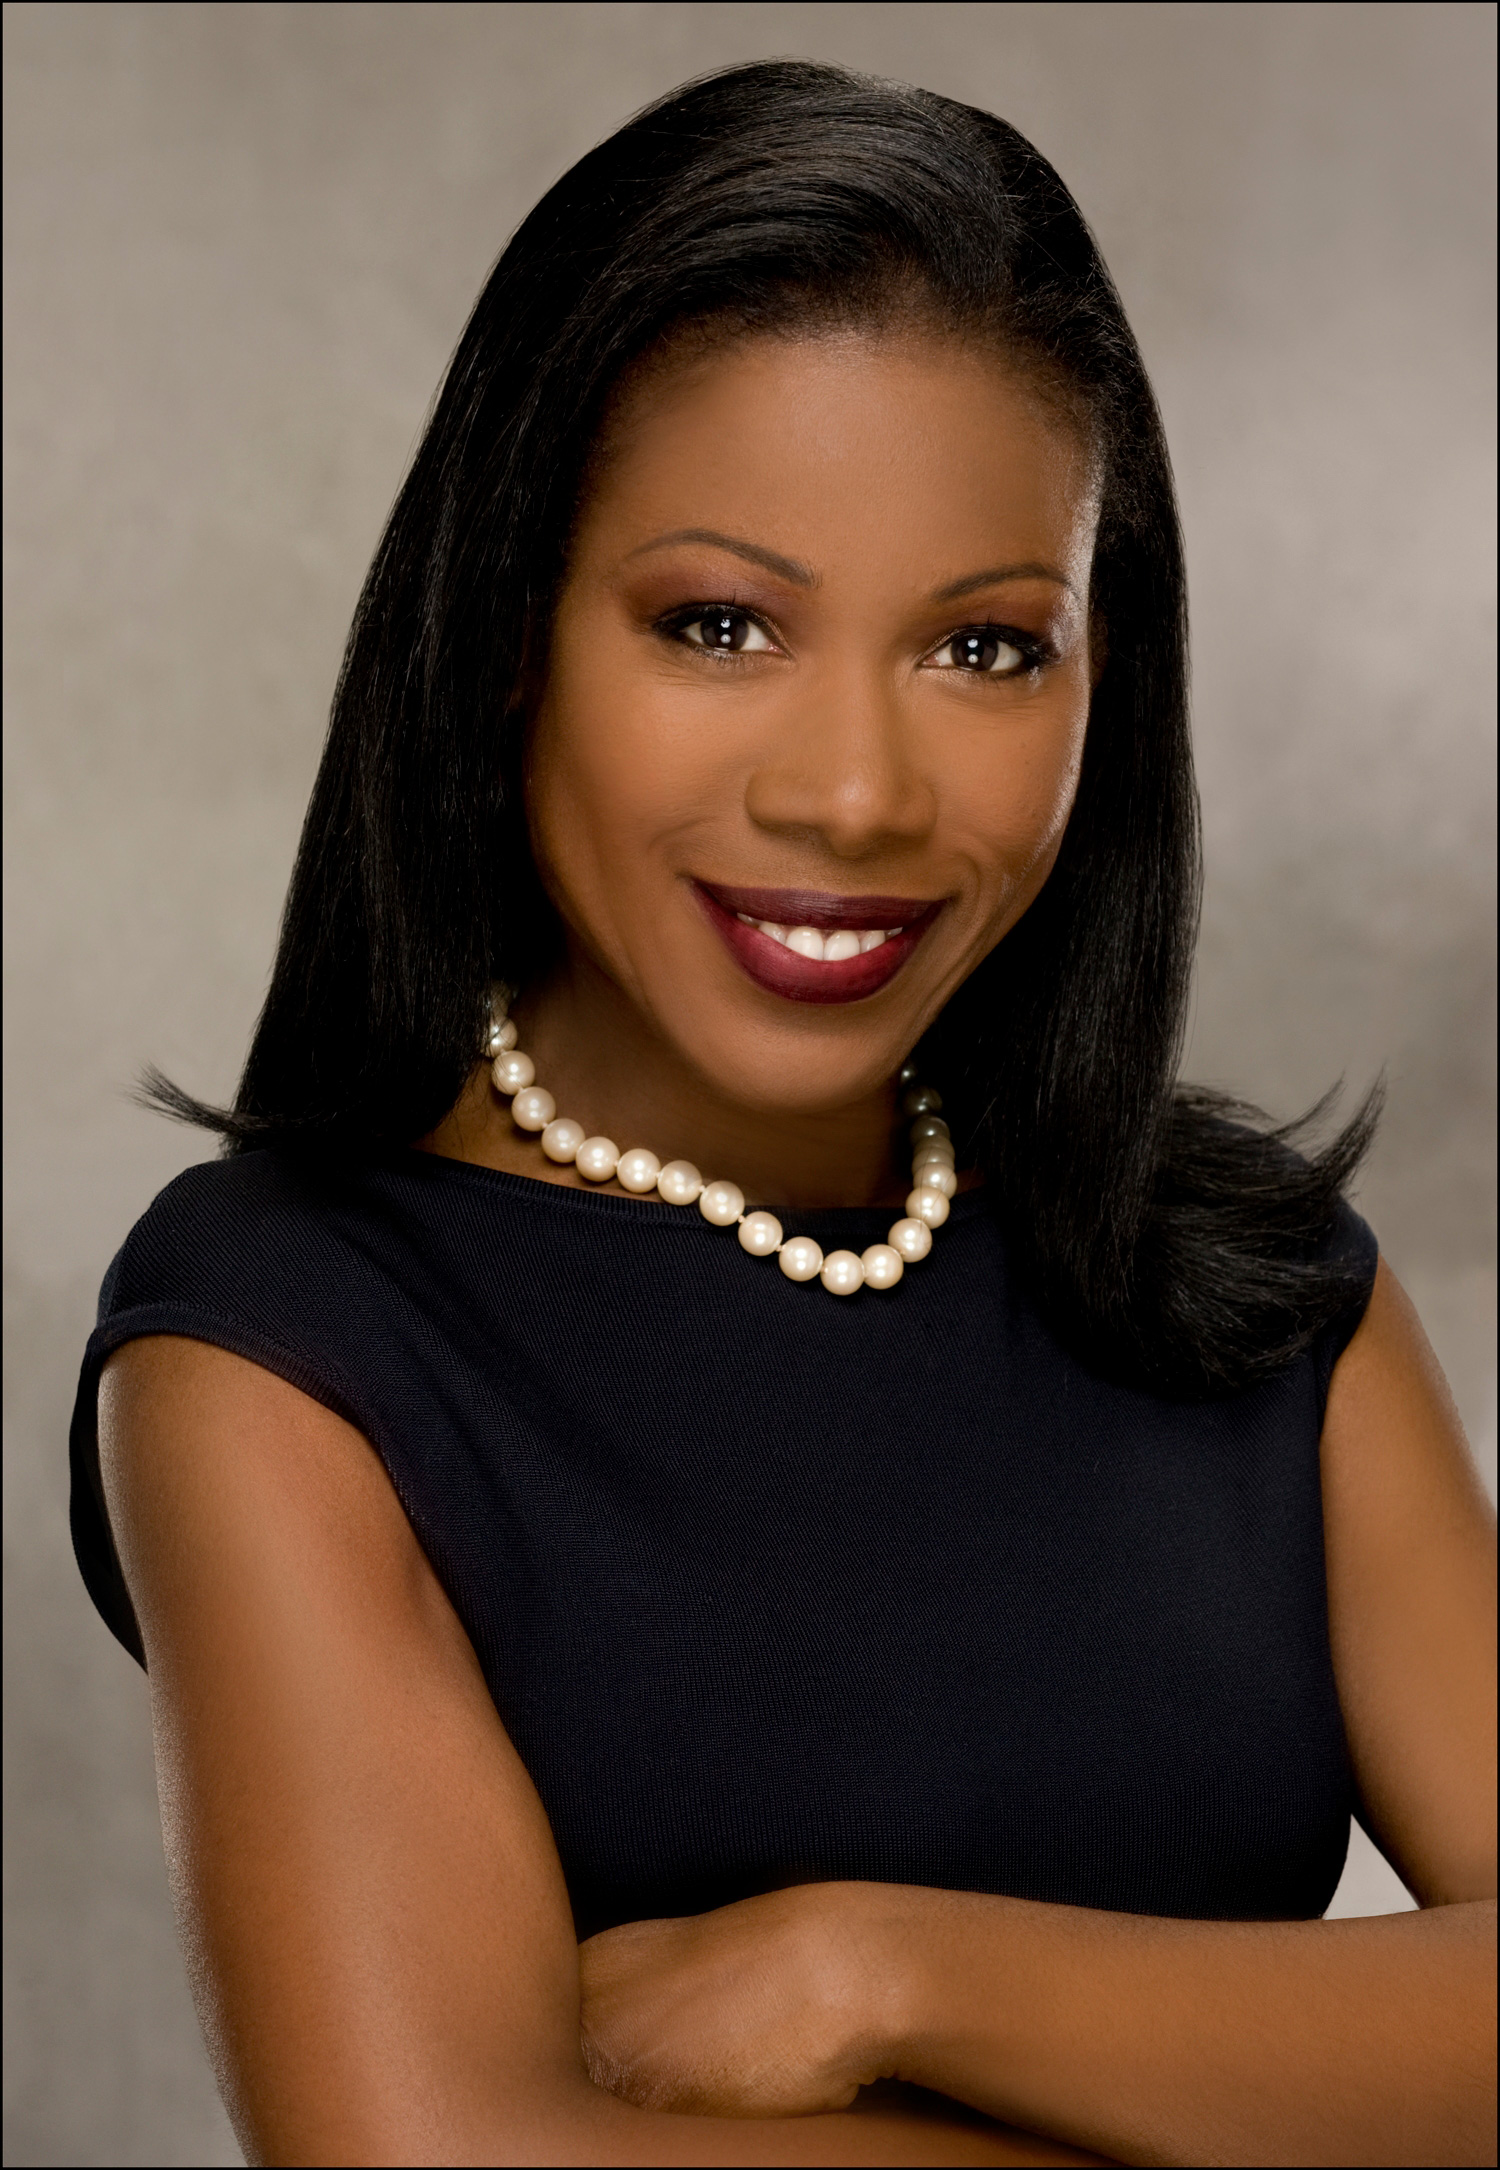 author Isabel Wilkerson will talk about America’s caste system